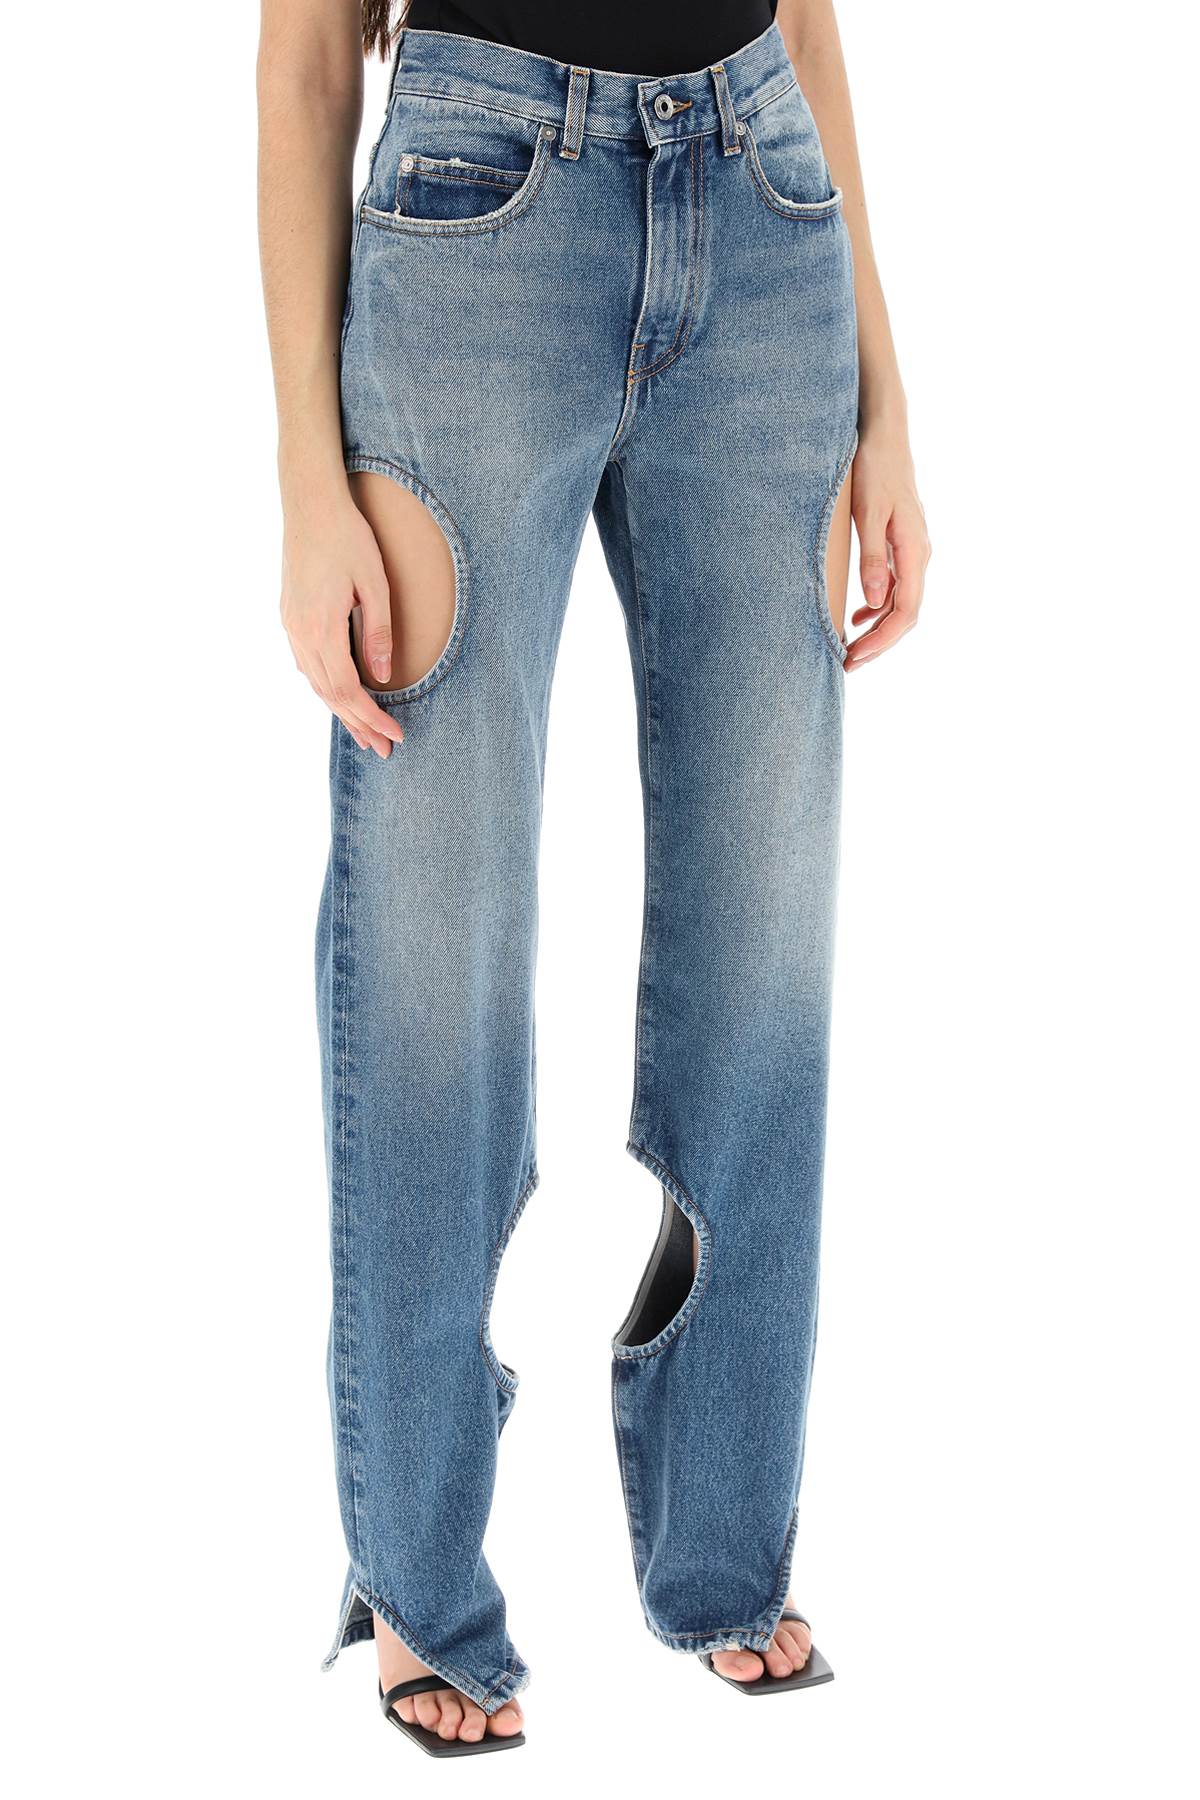 Meteor Cut-Out Jeans from the Off-White Wardrobe Collection